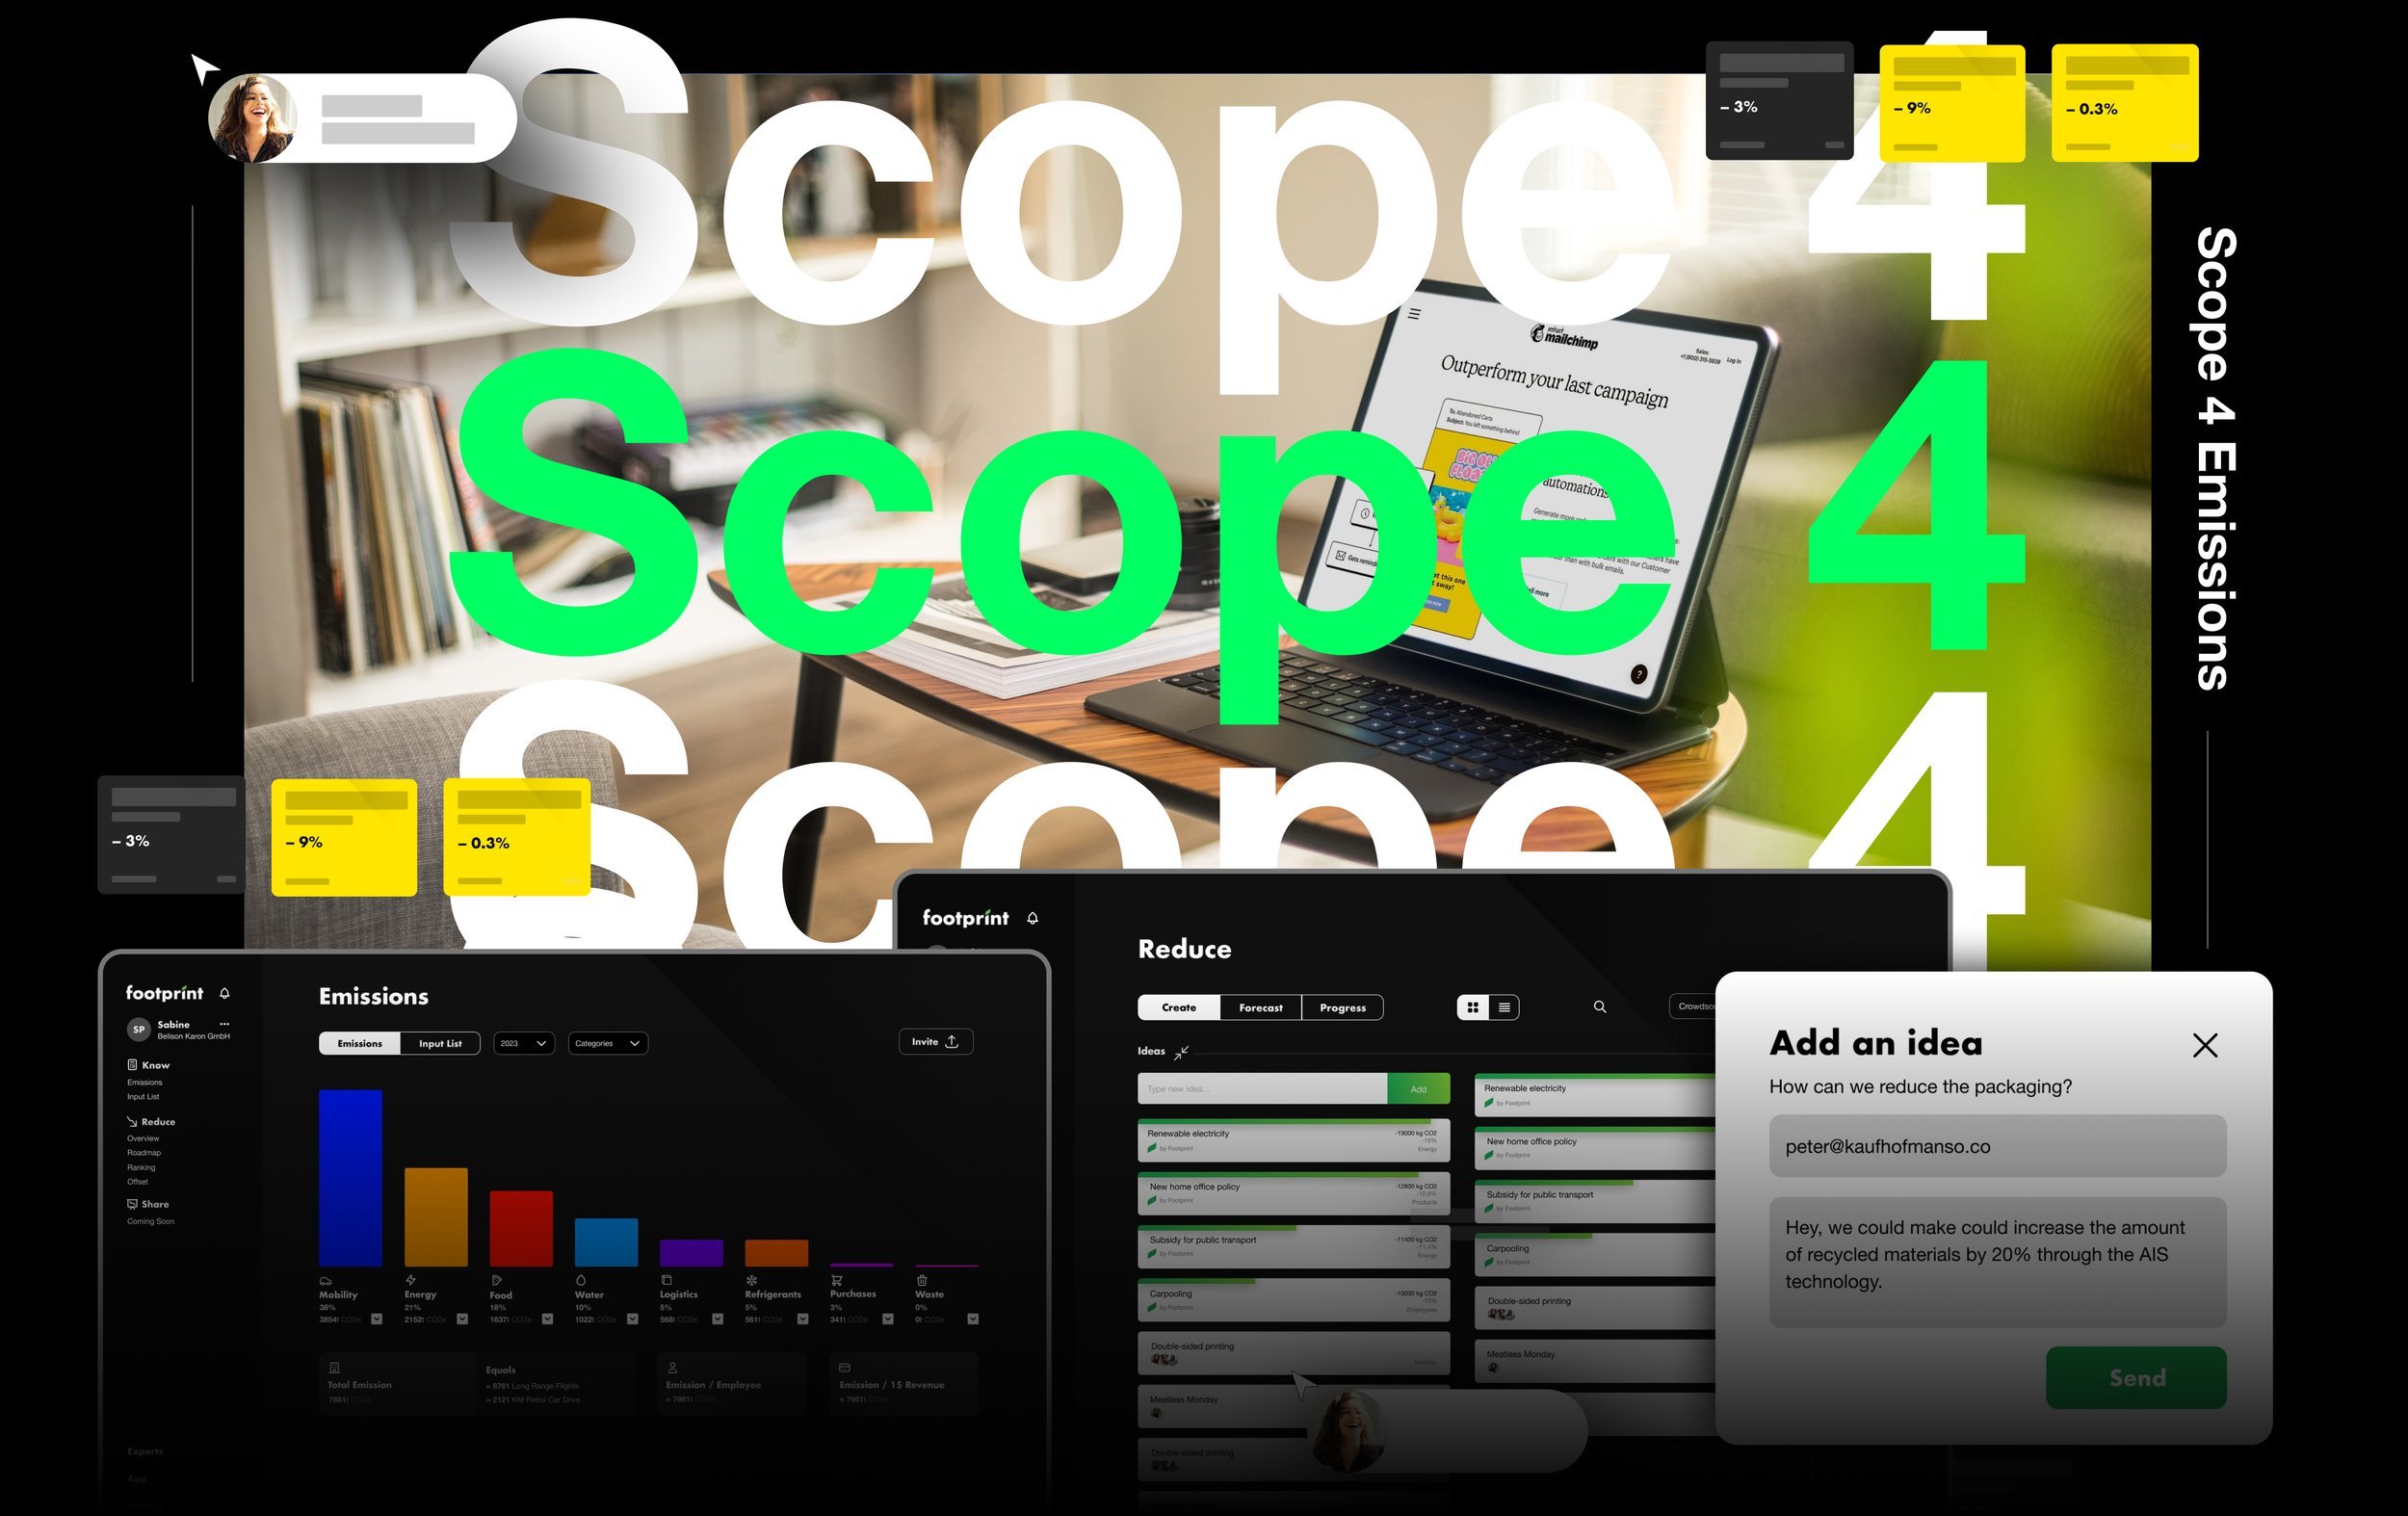 What is Scope 4 - and why it matters for your business